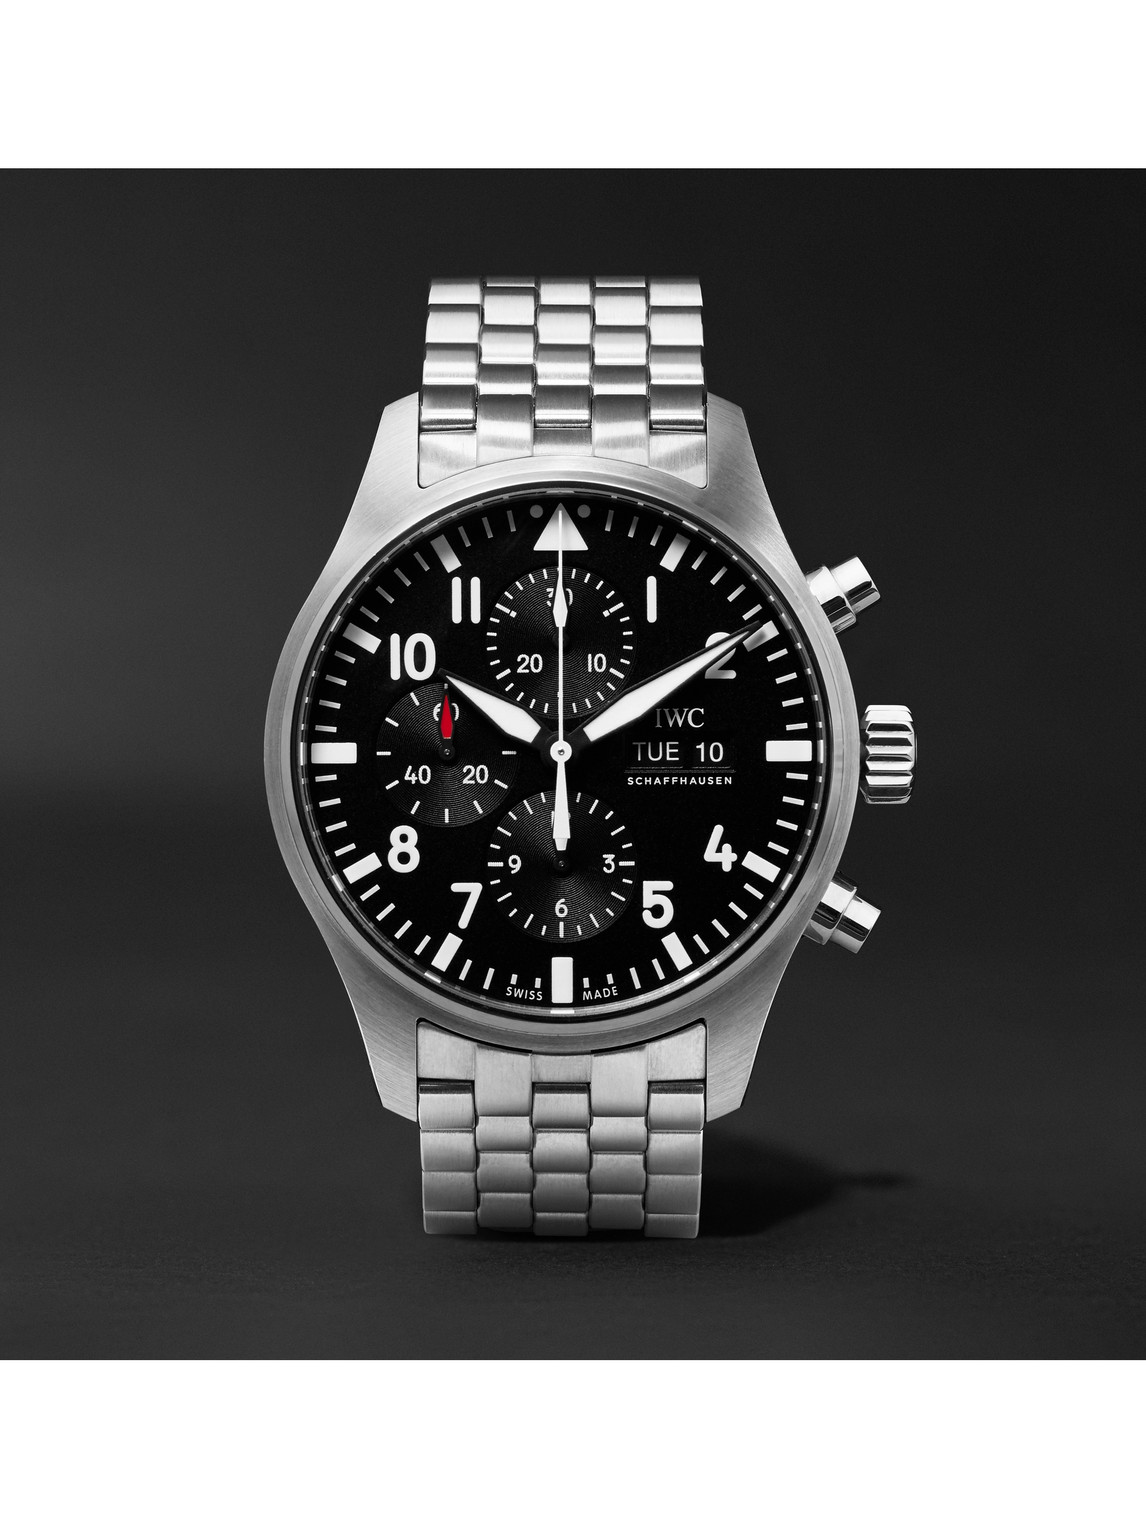 Pilot's Automatic Chronograph 43mm Stainless Steel Watch, Ref. No. IW377710